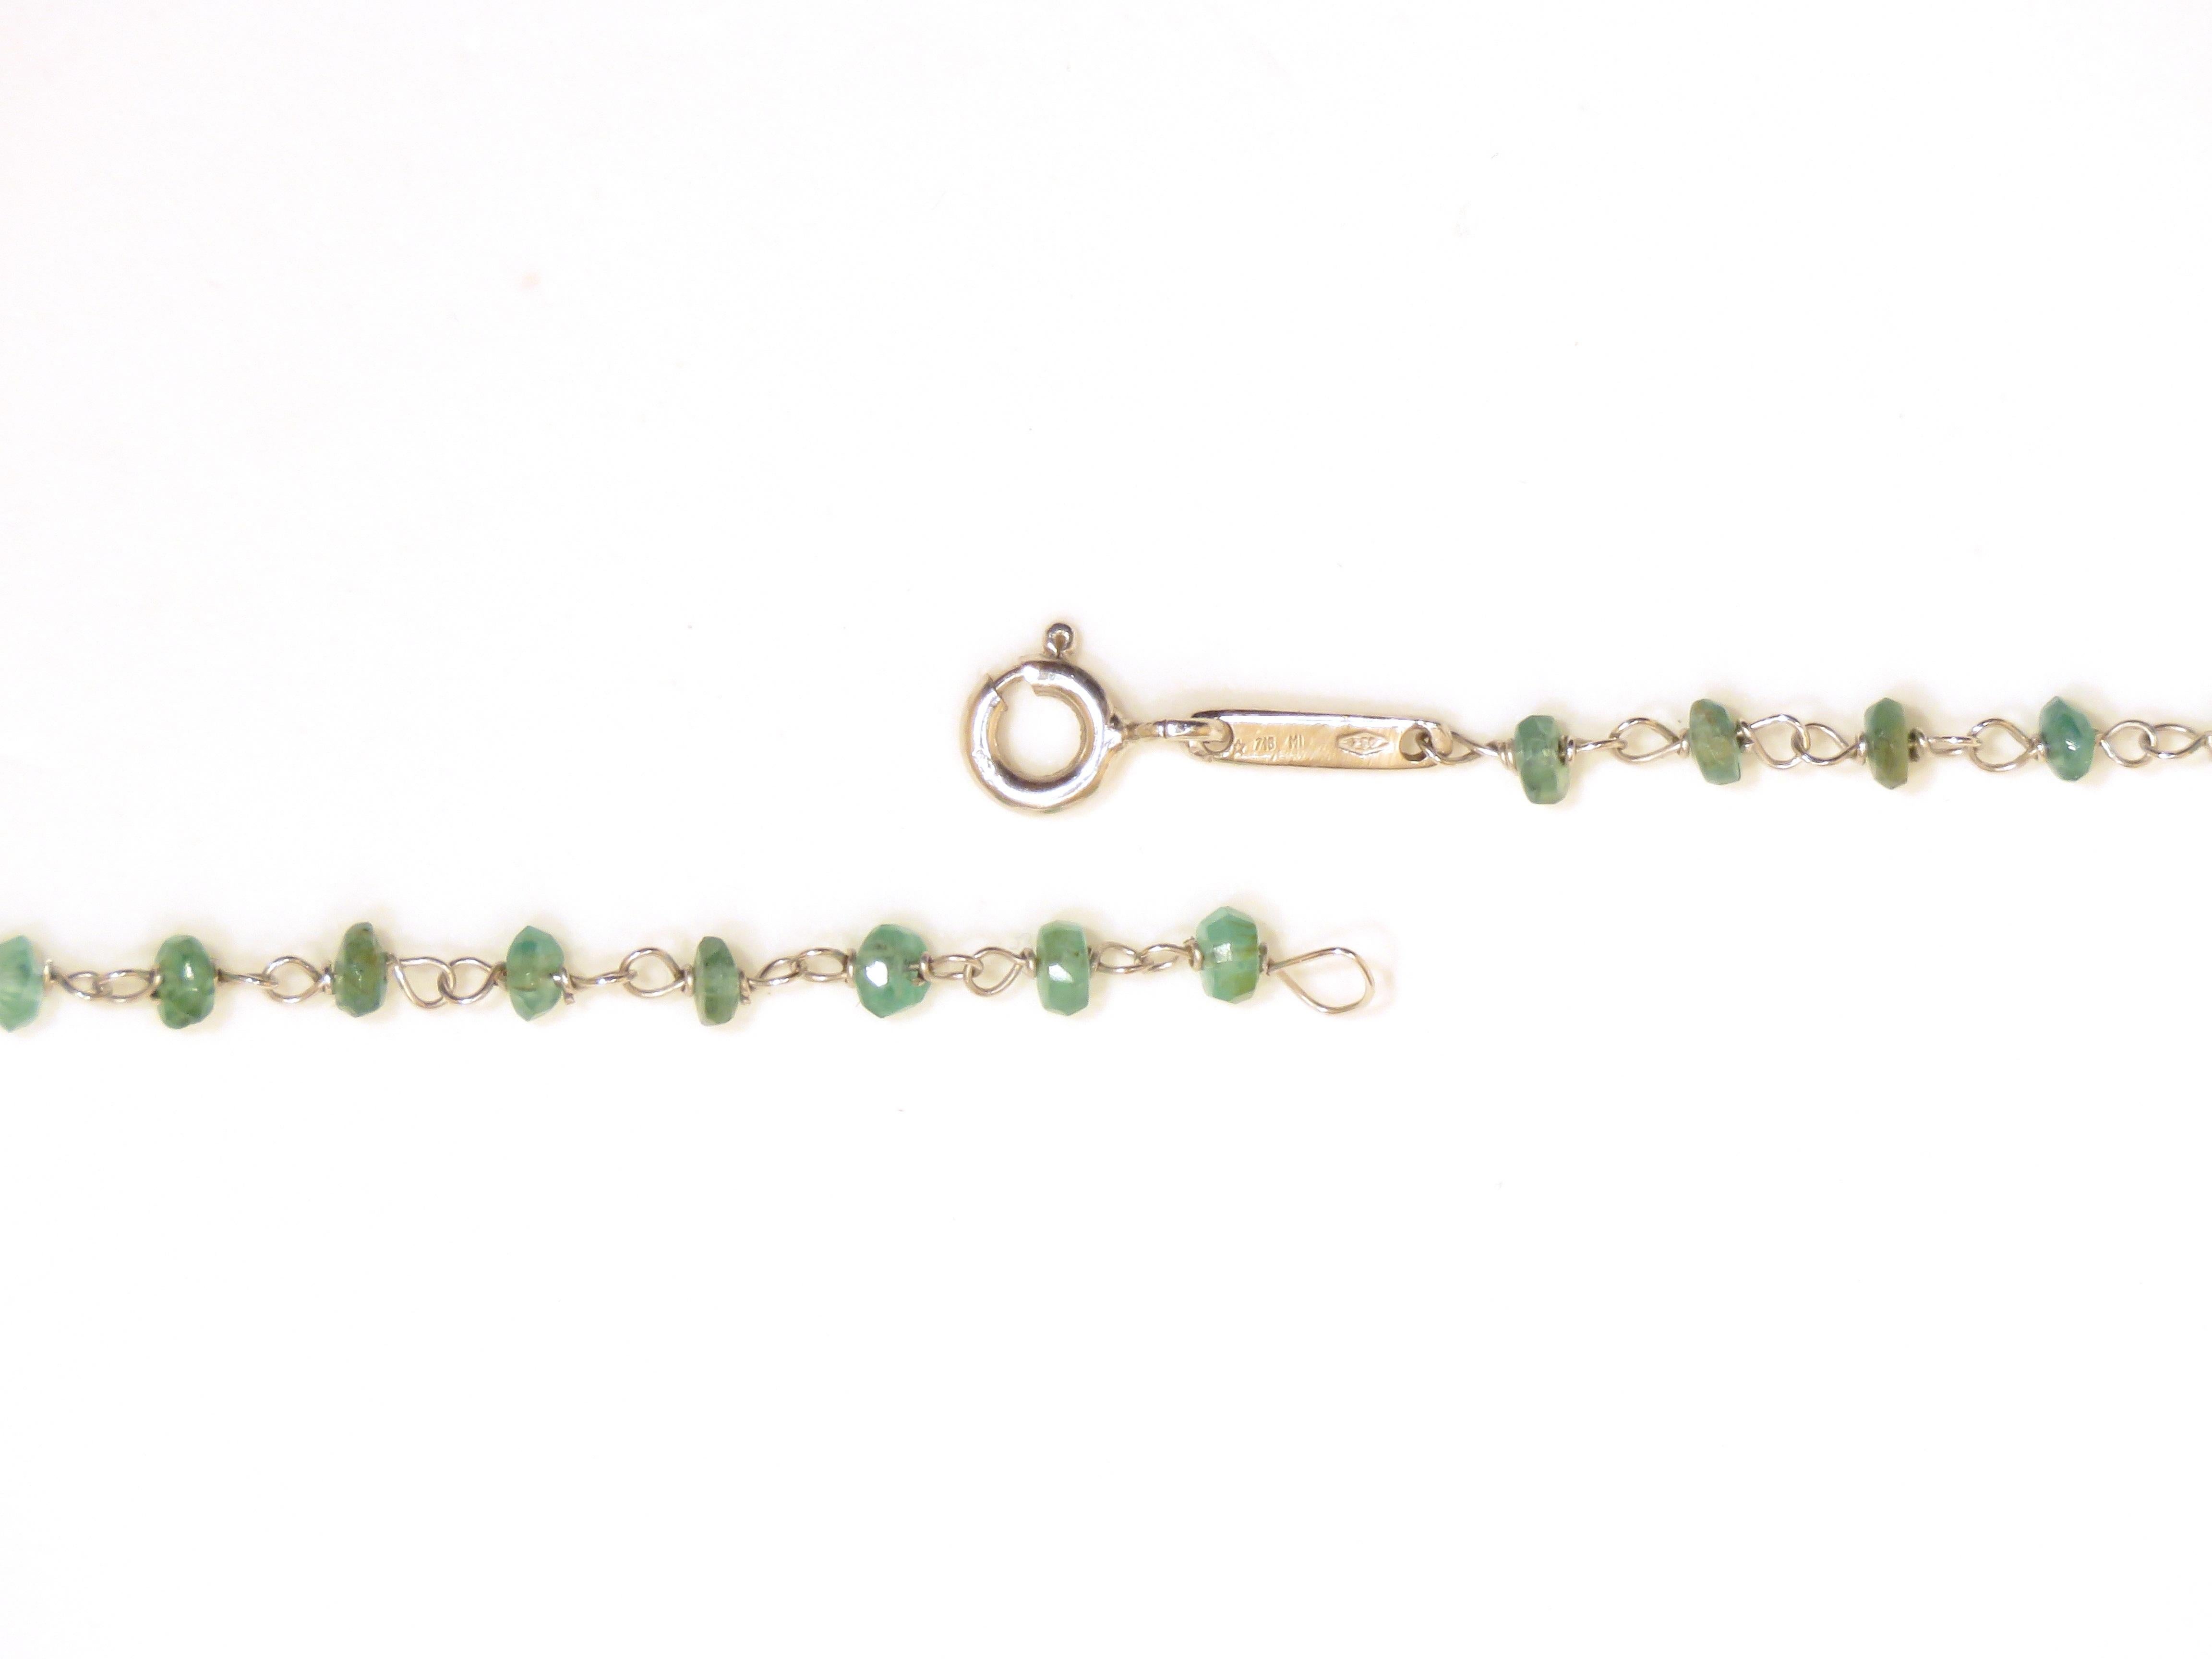 Ball Cut Emerald White Gold Necklace Handcrafted in Italy by Botta Gioielli